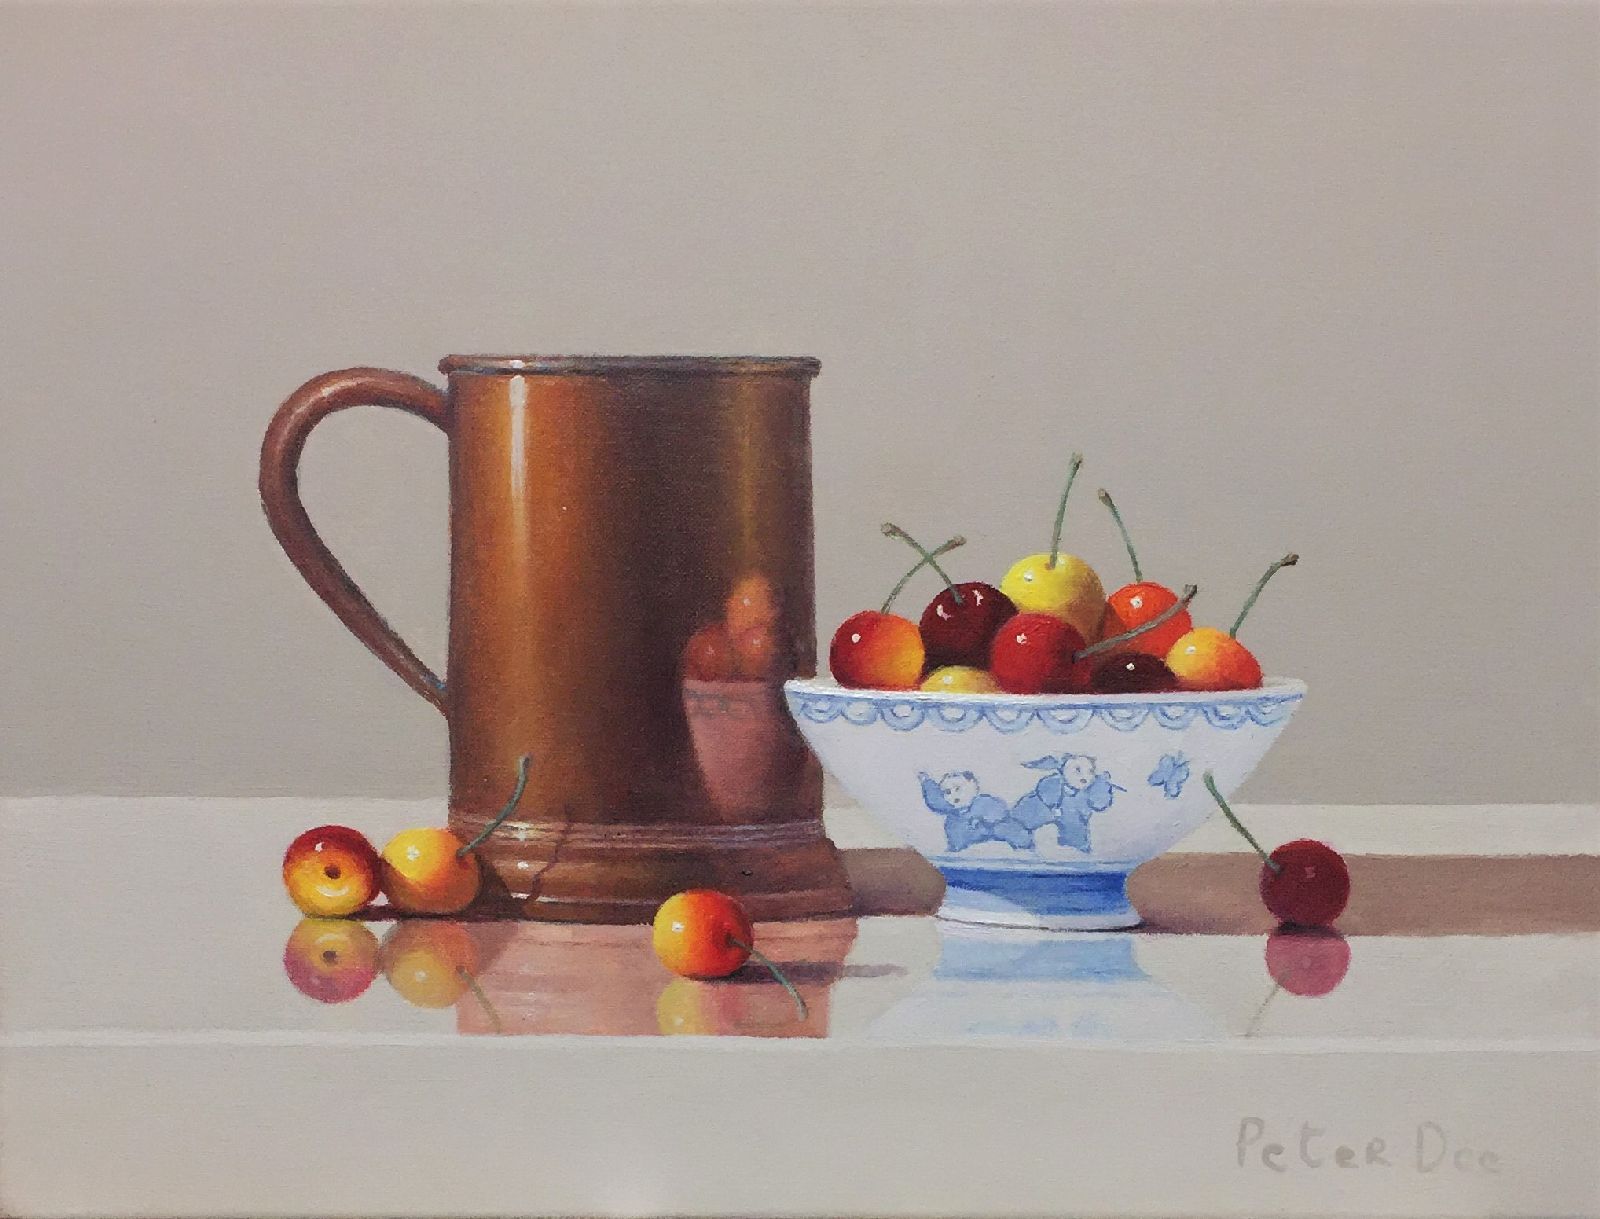 Peter Dee - Still Life with Copper Tankard and Cherries 